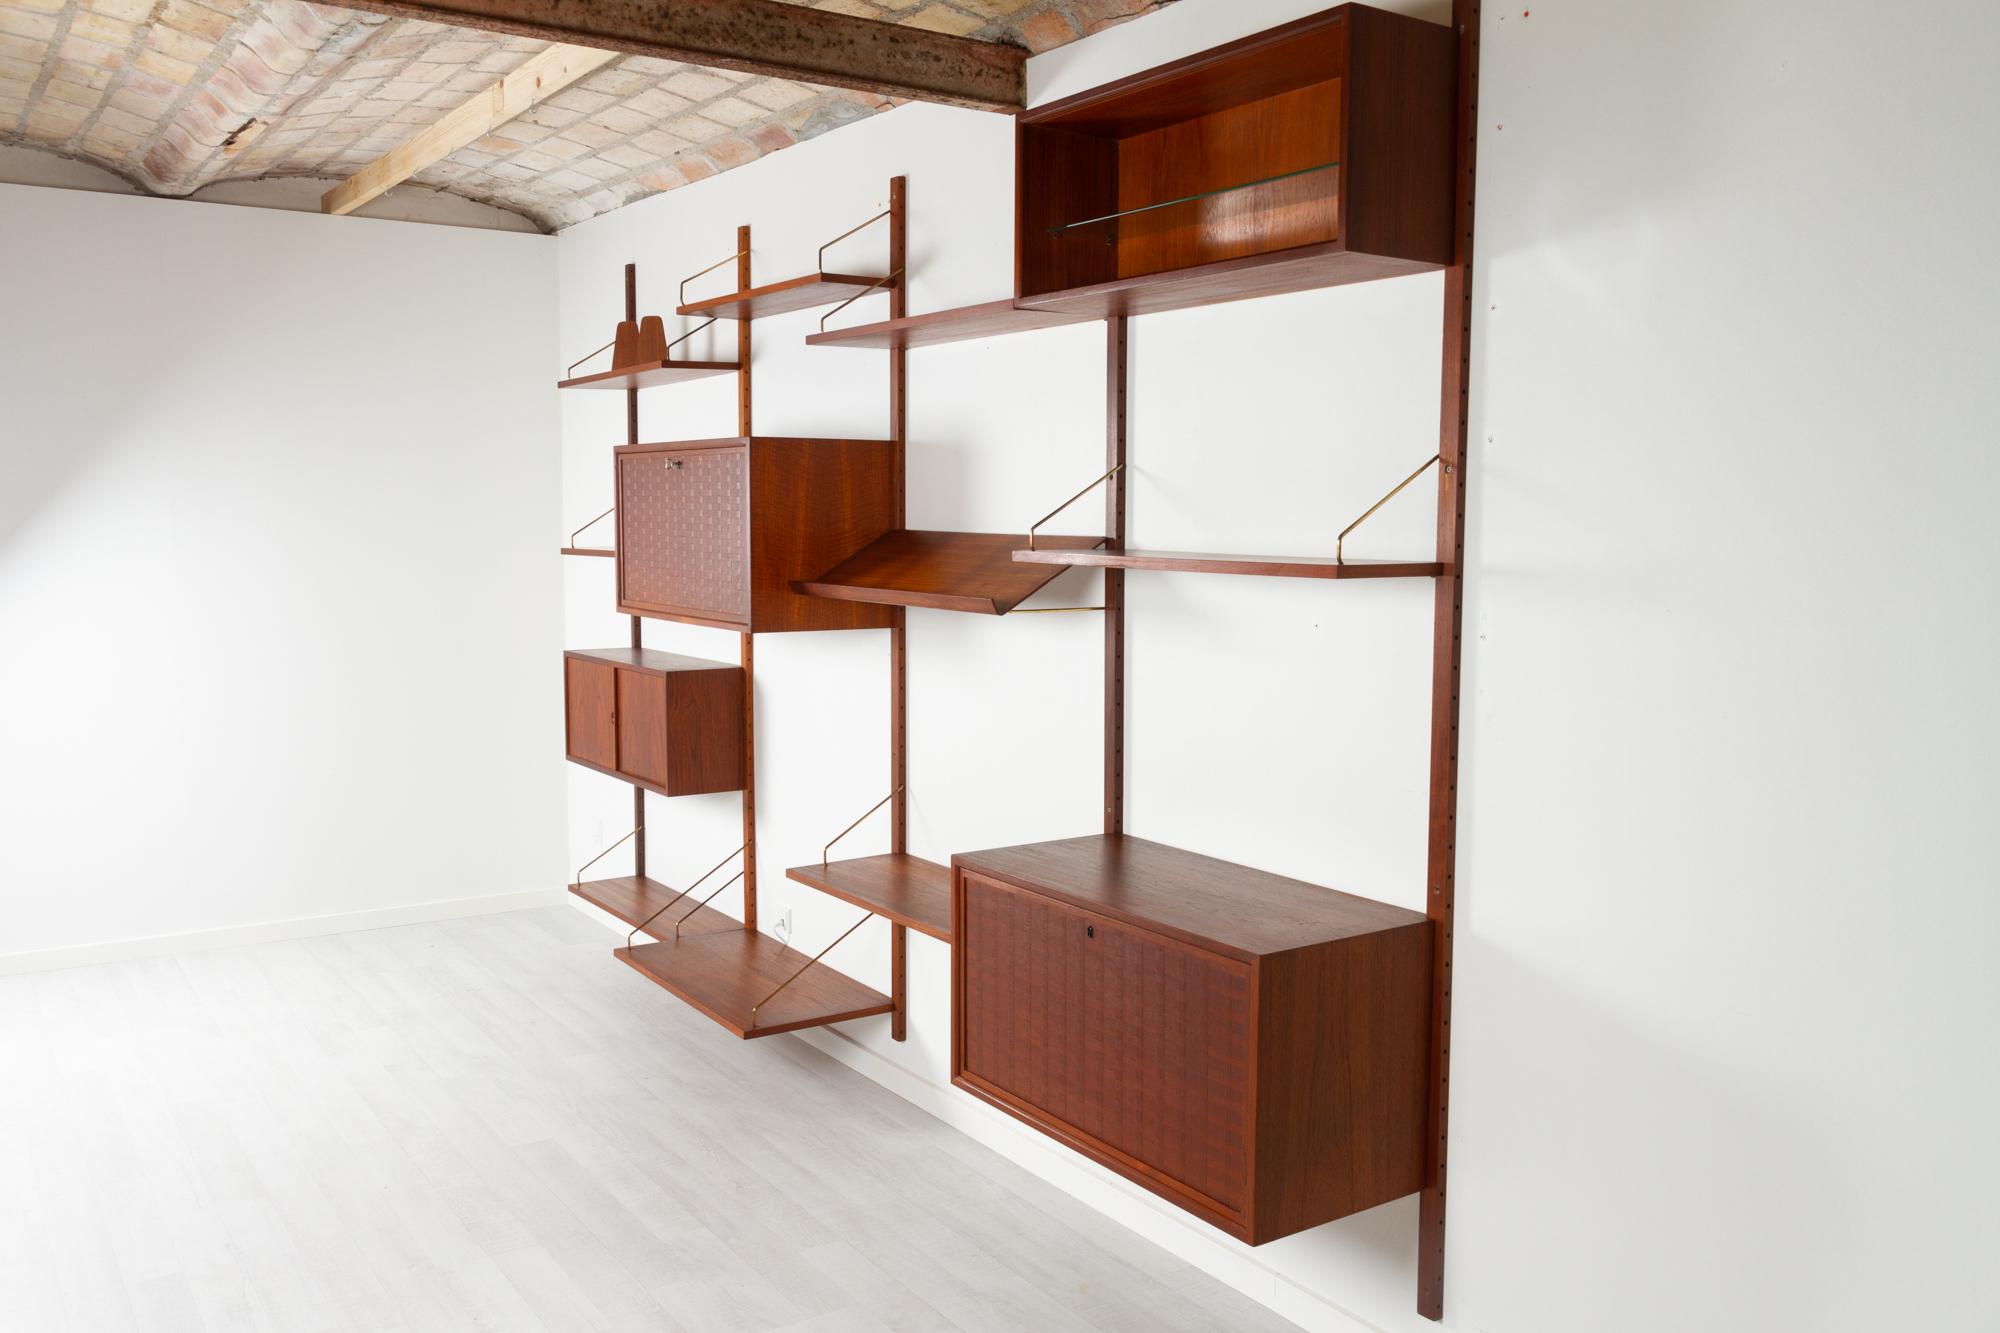 Vintage Danish teak wall unit by Poul Cadovius for Cado, 1950s.

Mid-Century Modern 4 bay shelving system model Royal. This is a original vintage shelving system designed in 1948 by Danish architect Poul Cadovius. 
Cadovius had the revolutionary